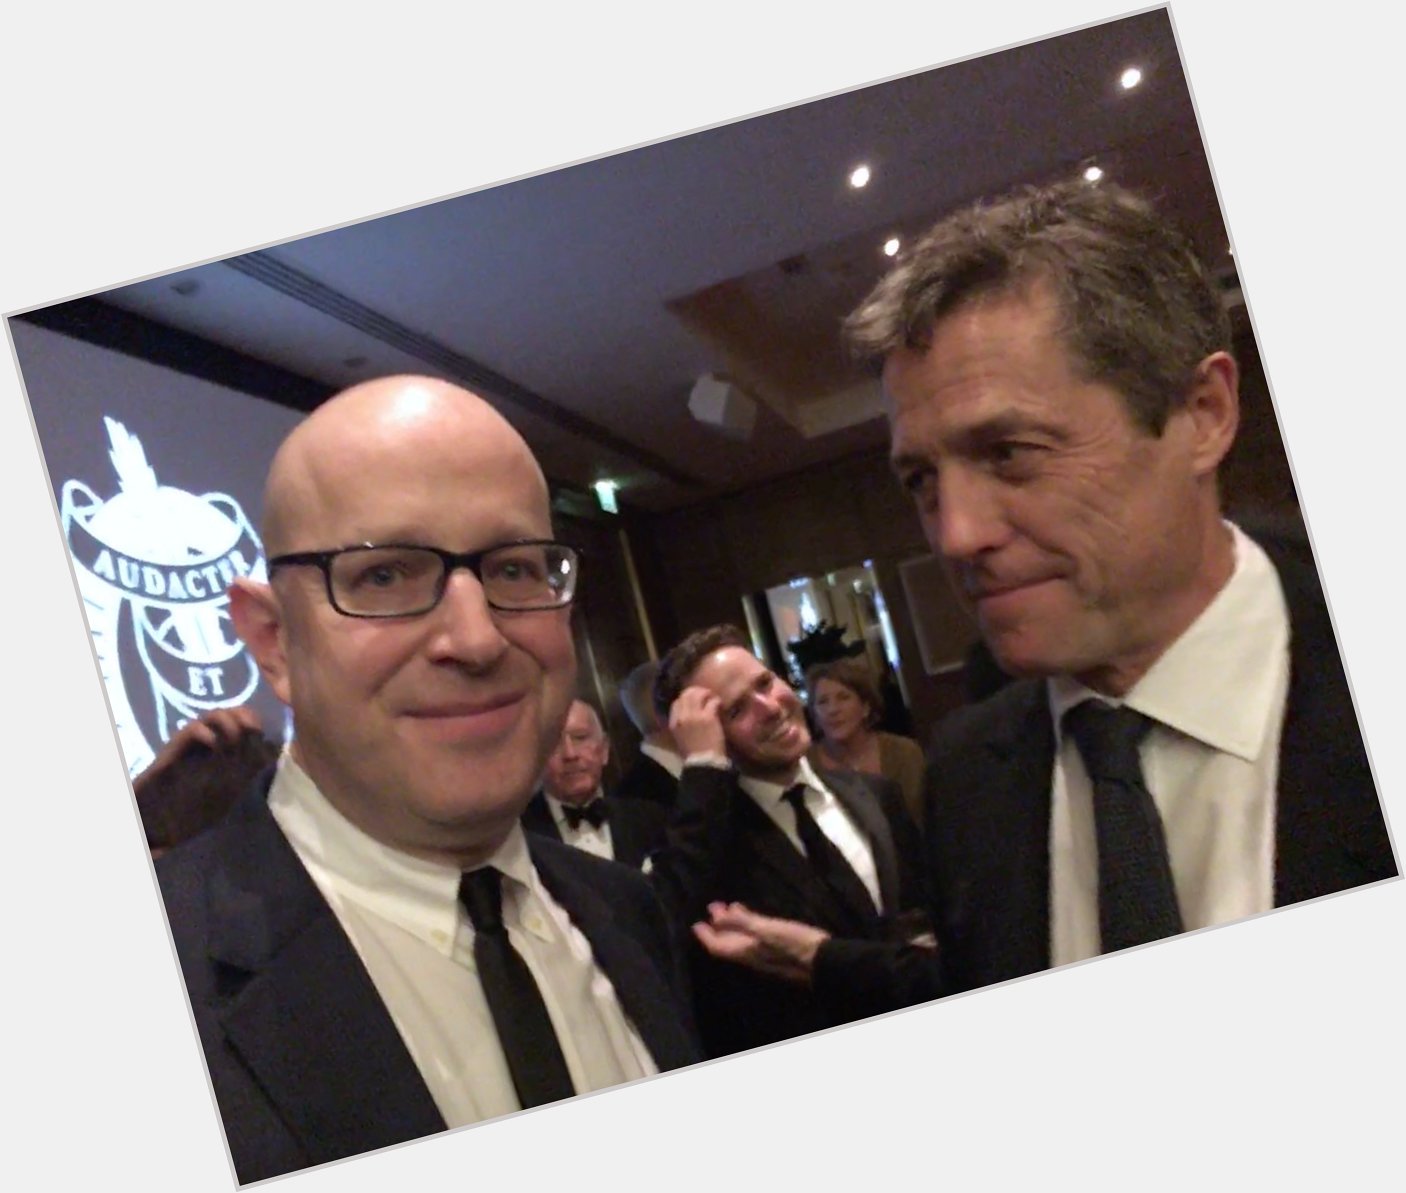 As Hugh Grant turns 58 - and Happy Birthday to him - let s remember this highlight from both of our lives. 